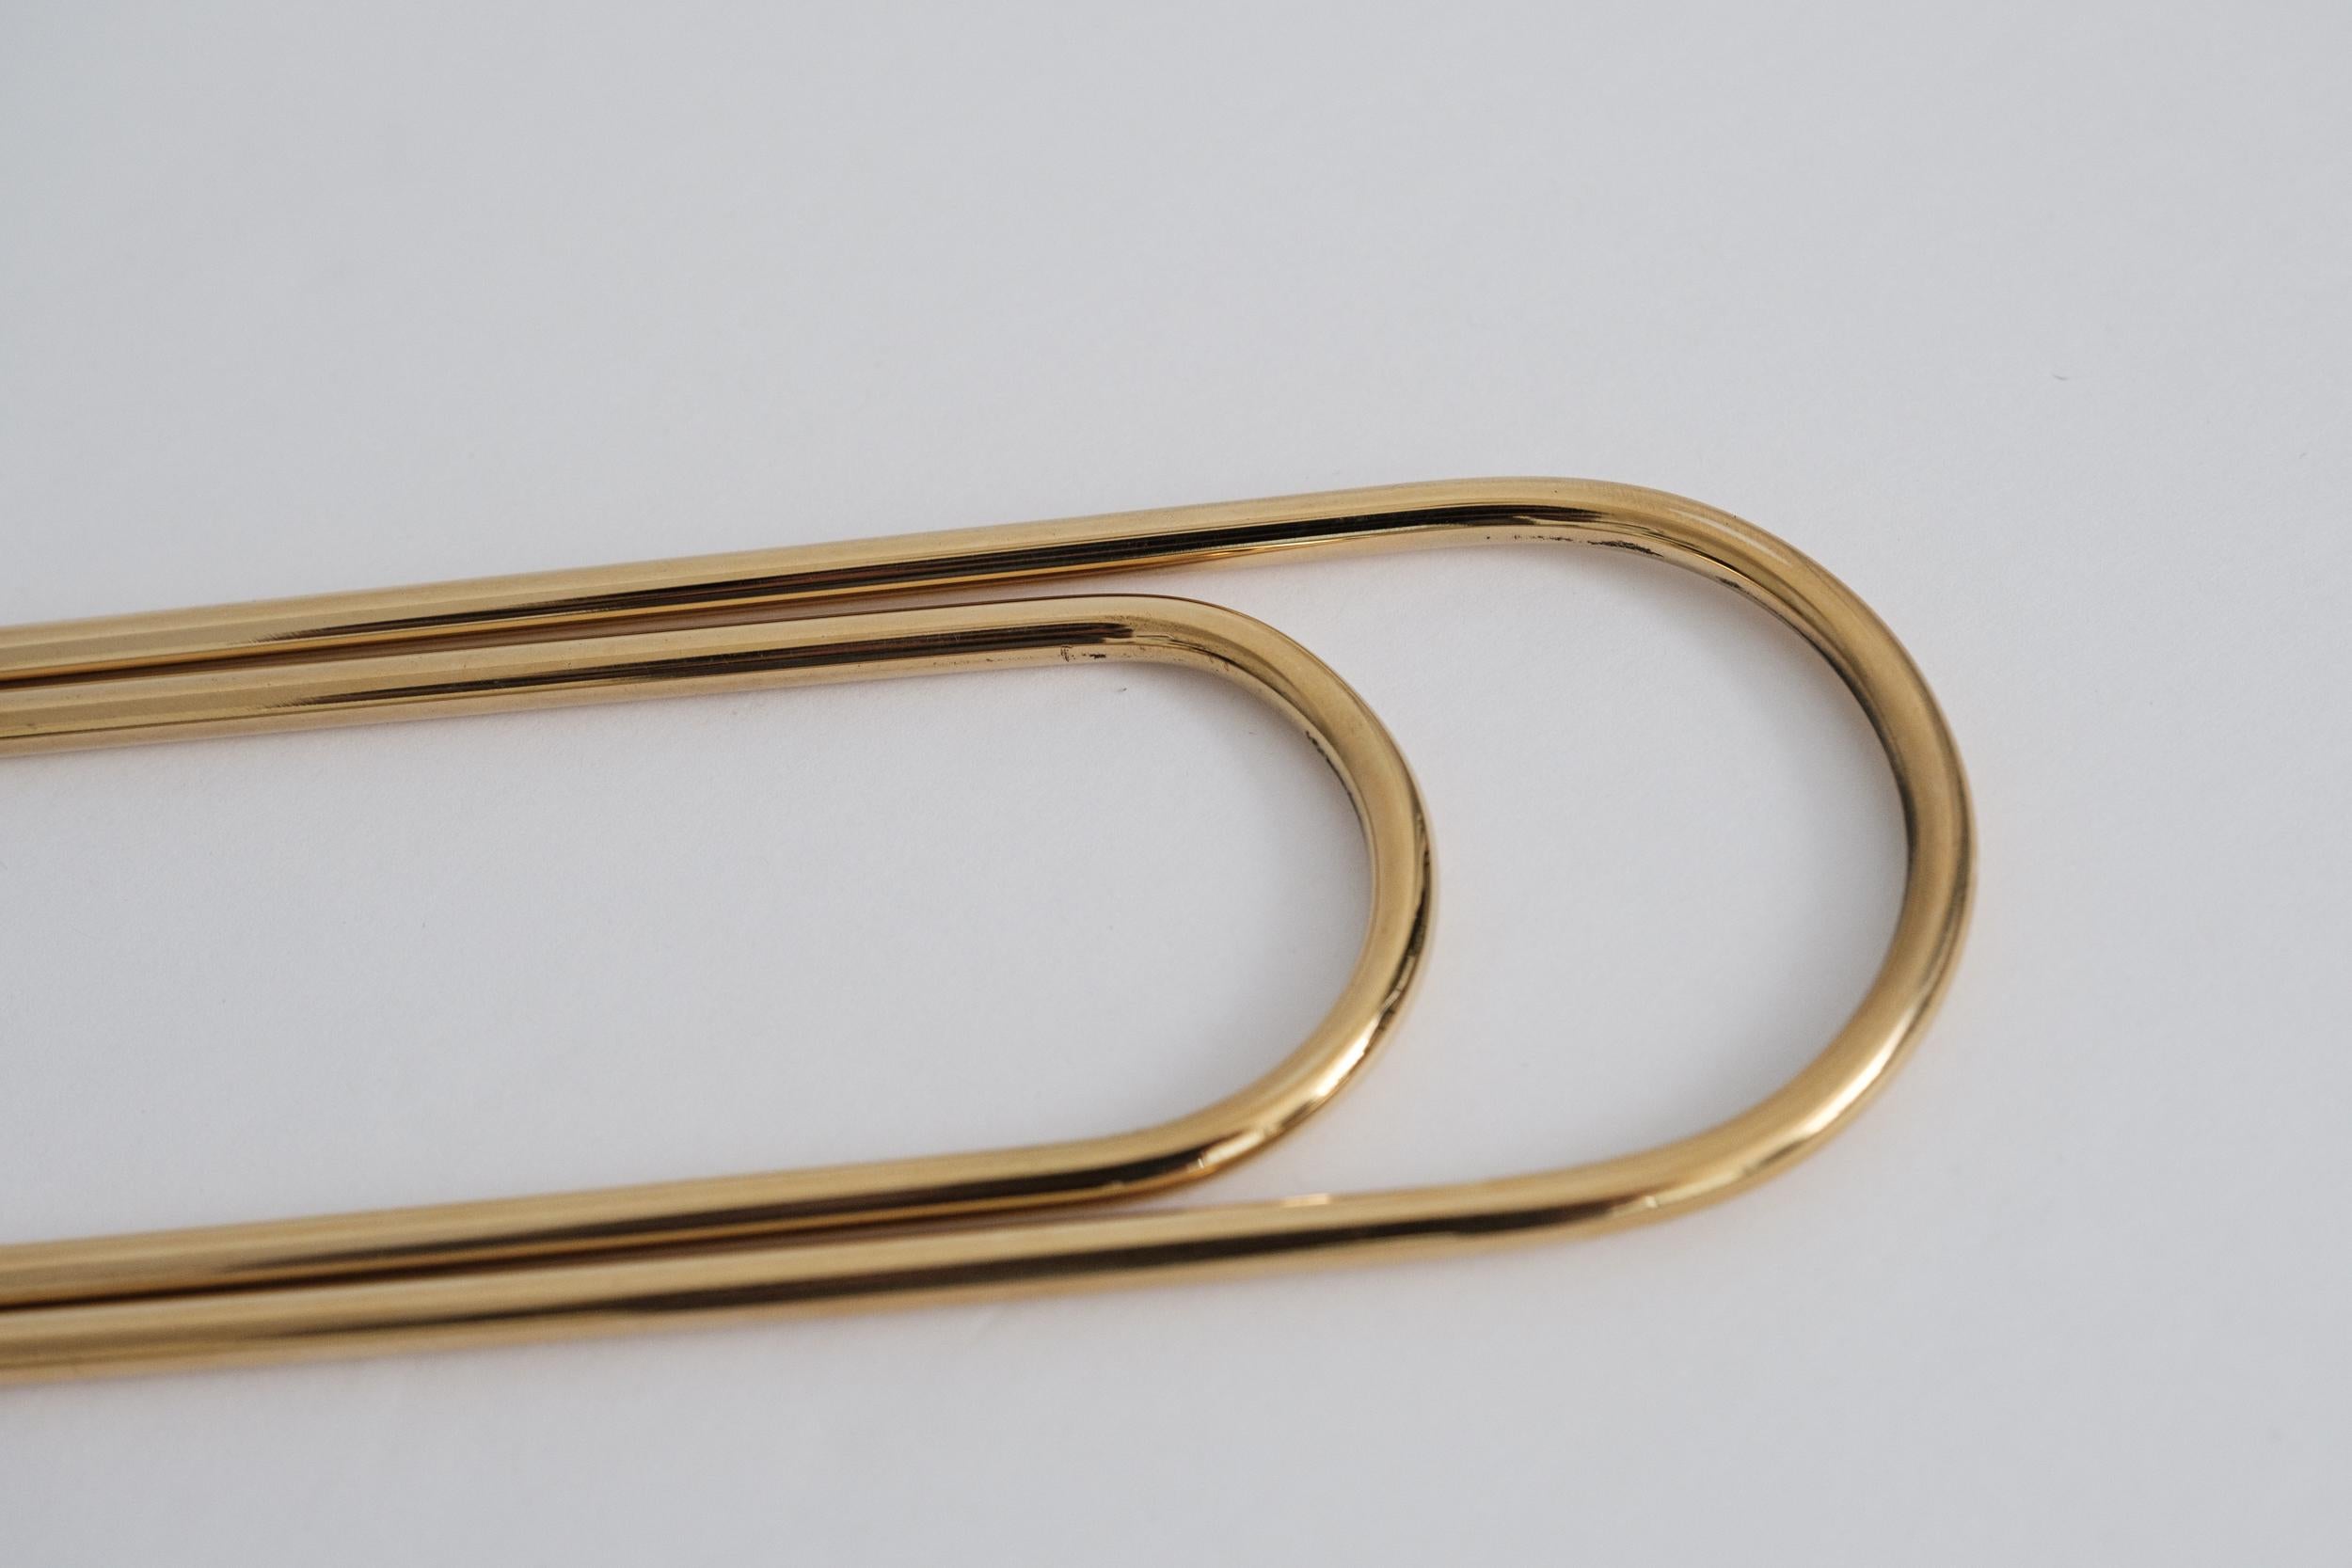 Large Carl Auböck Model #4751 'Paperclip' Brass Paperweight For Sale 4